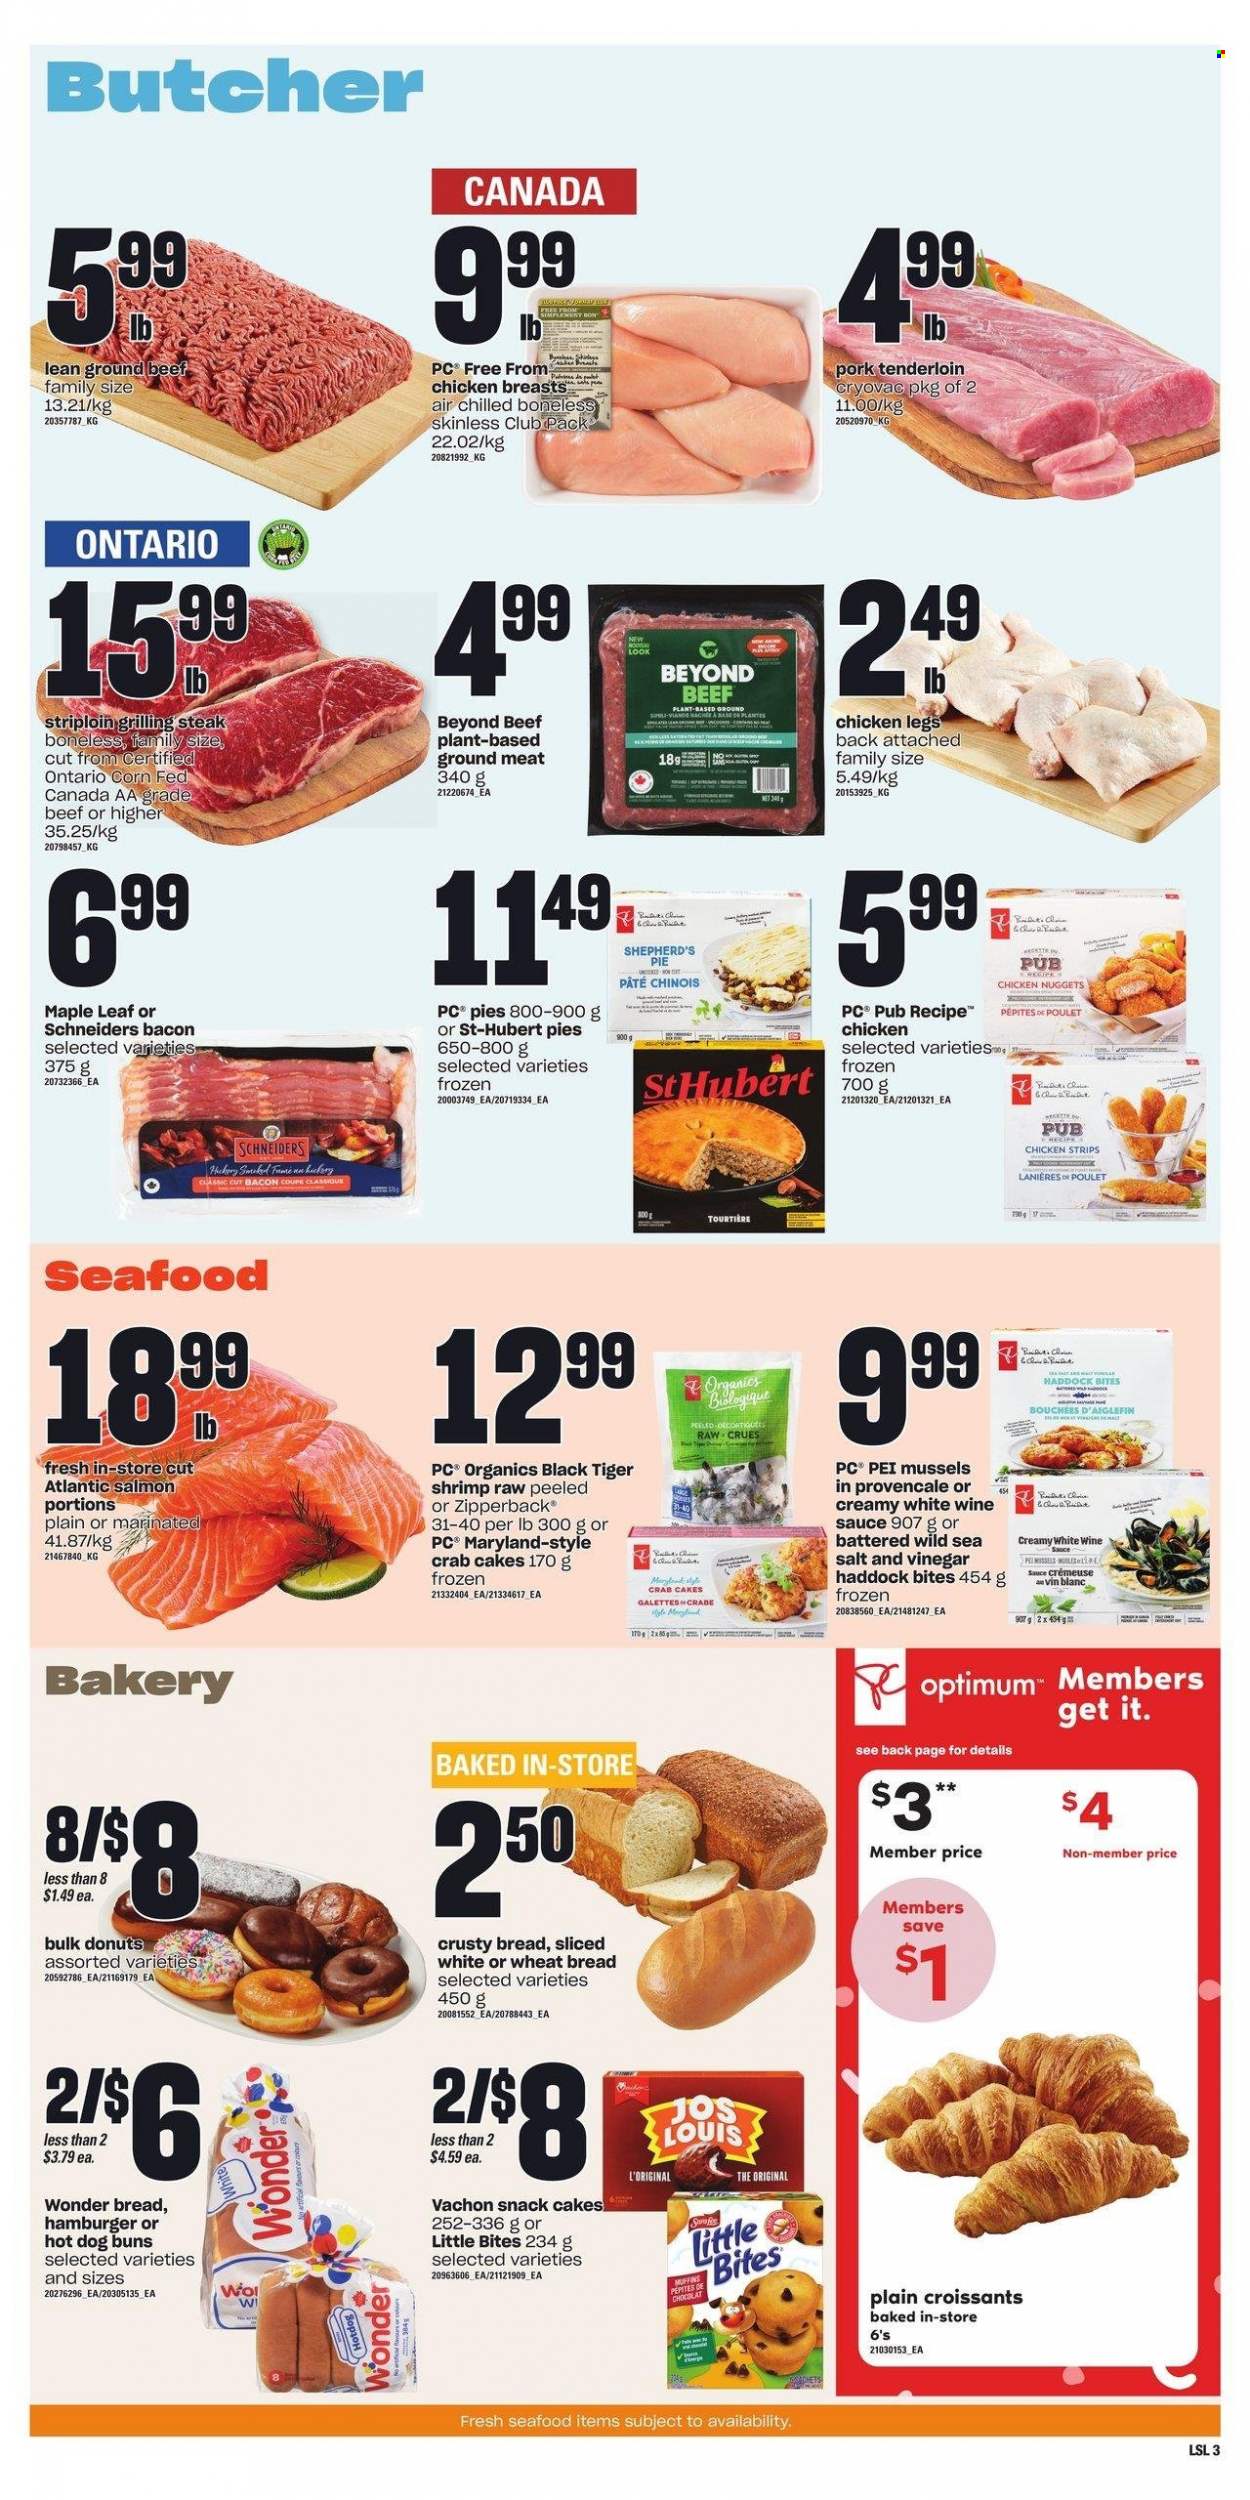 thumbnail - Loblaws Flyer - January 26, 2023 - February 01, 2023 - Sales products - wheat bread, pie, croissant, buns, donut, muffin, mussels, salmon, haddock, seafood, shrimps, crab cake, nuggets, sauce, chicken nuggets, bacon, strips, chicken strips, snack, Little Bites, sea salt, vinegar, white wine, chicken breasts, chicken legs, chicken, beef meat, ground beef, pork meat, pork tenderloin, Optimum, steak. Page 4.